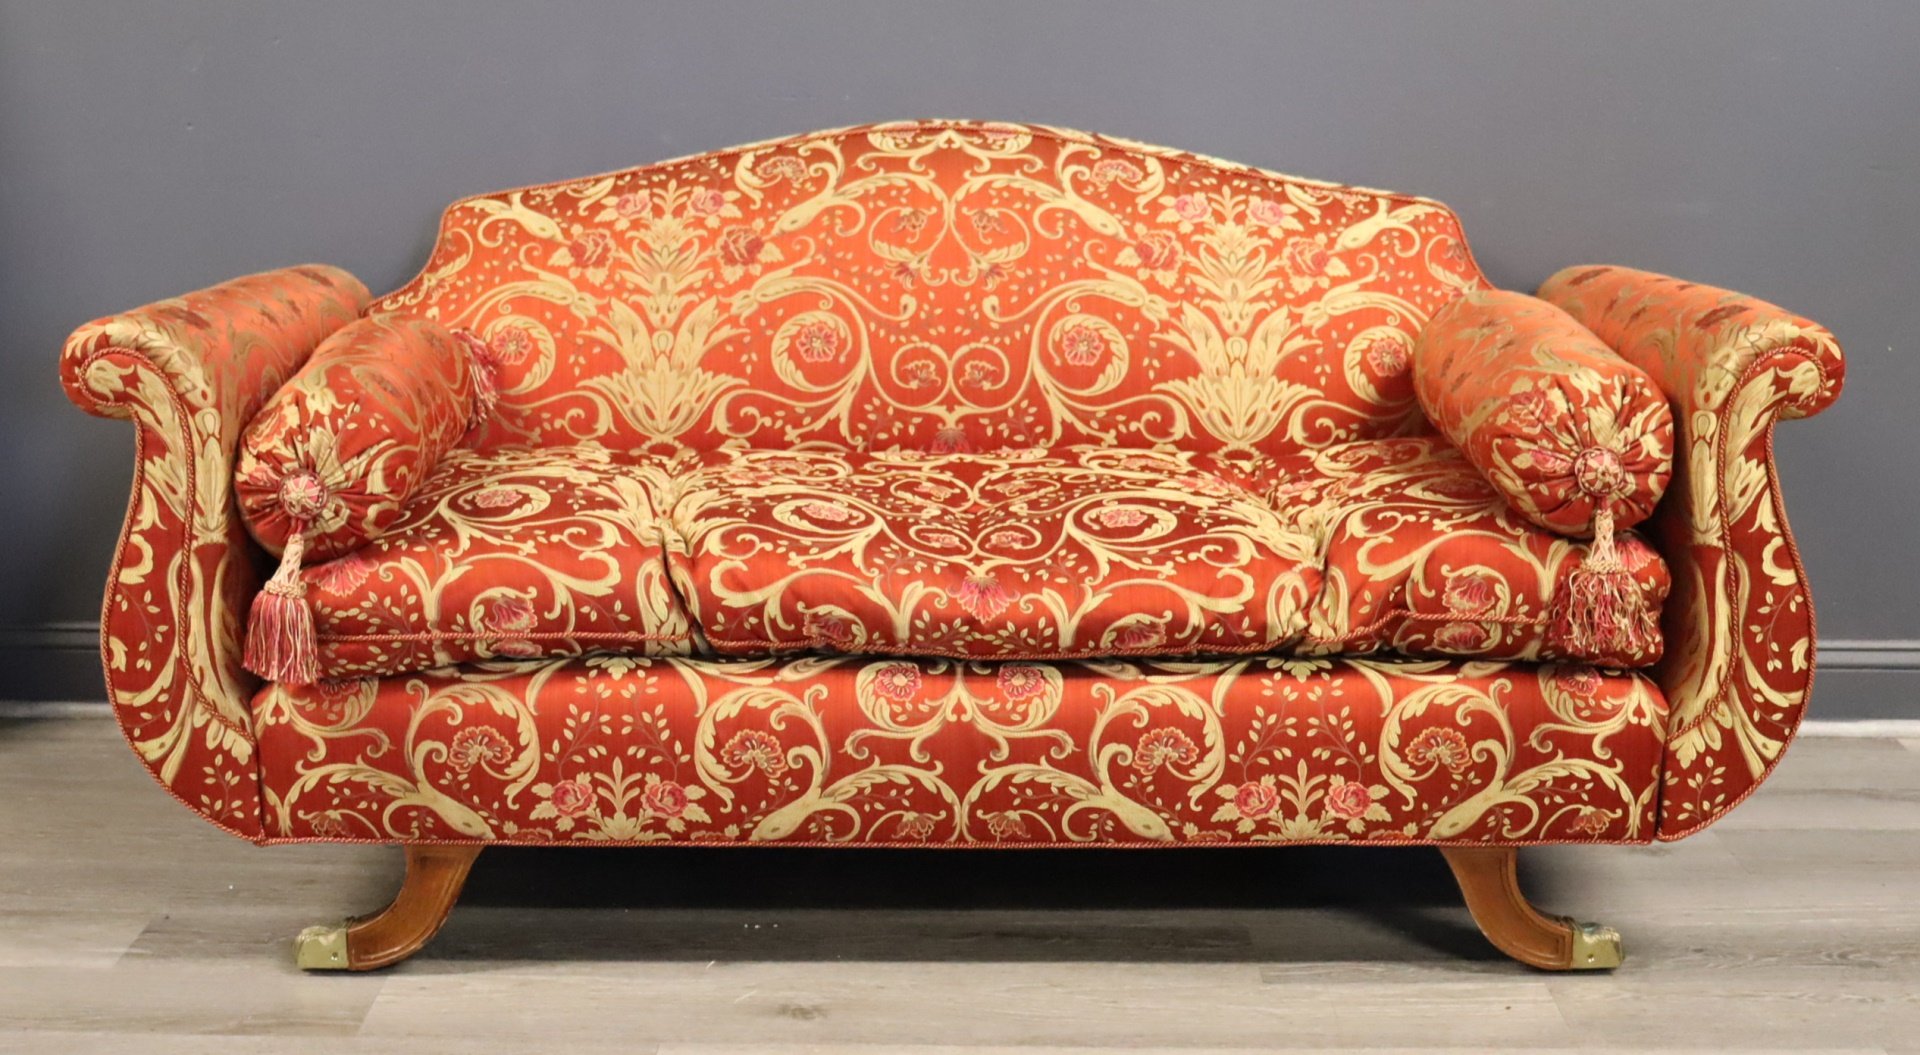 EMPIRE STYLE UPHOLSTERED SCROLL 30b8c2